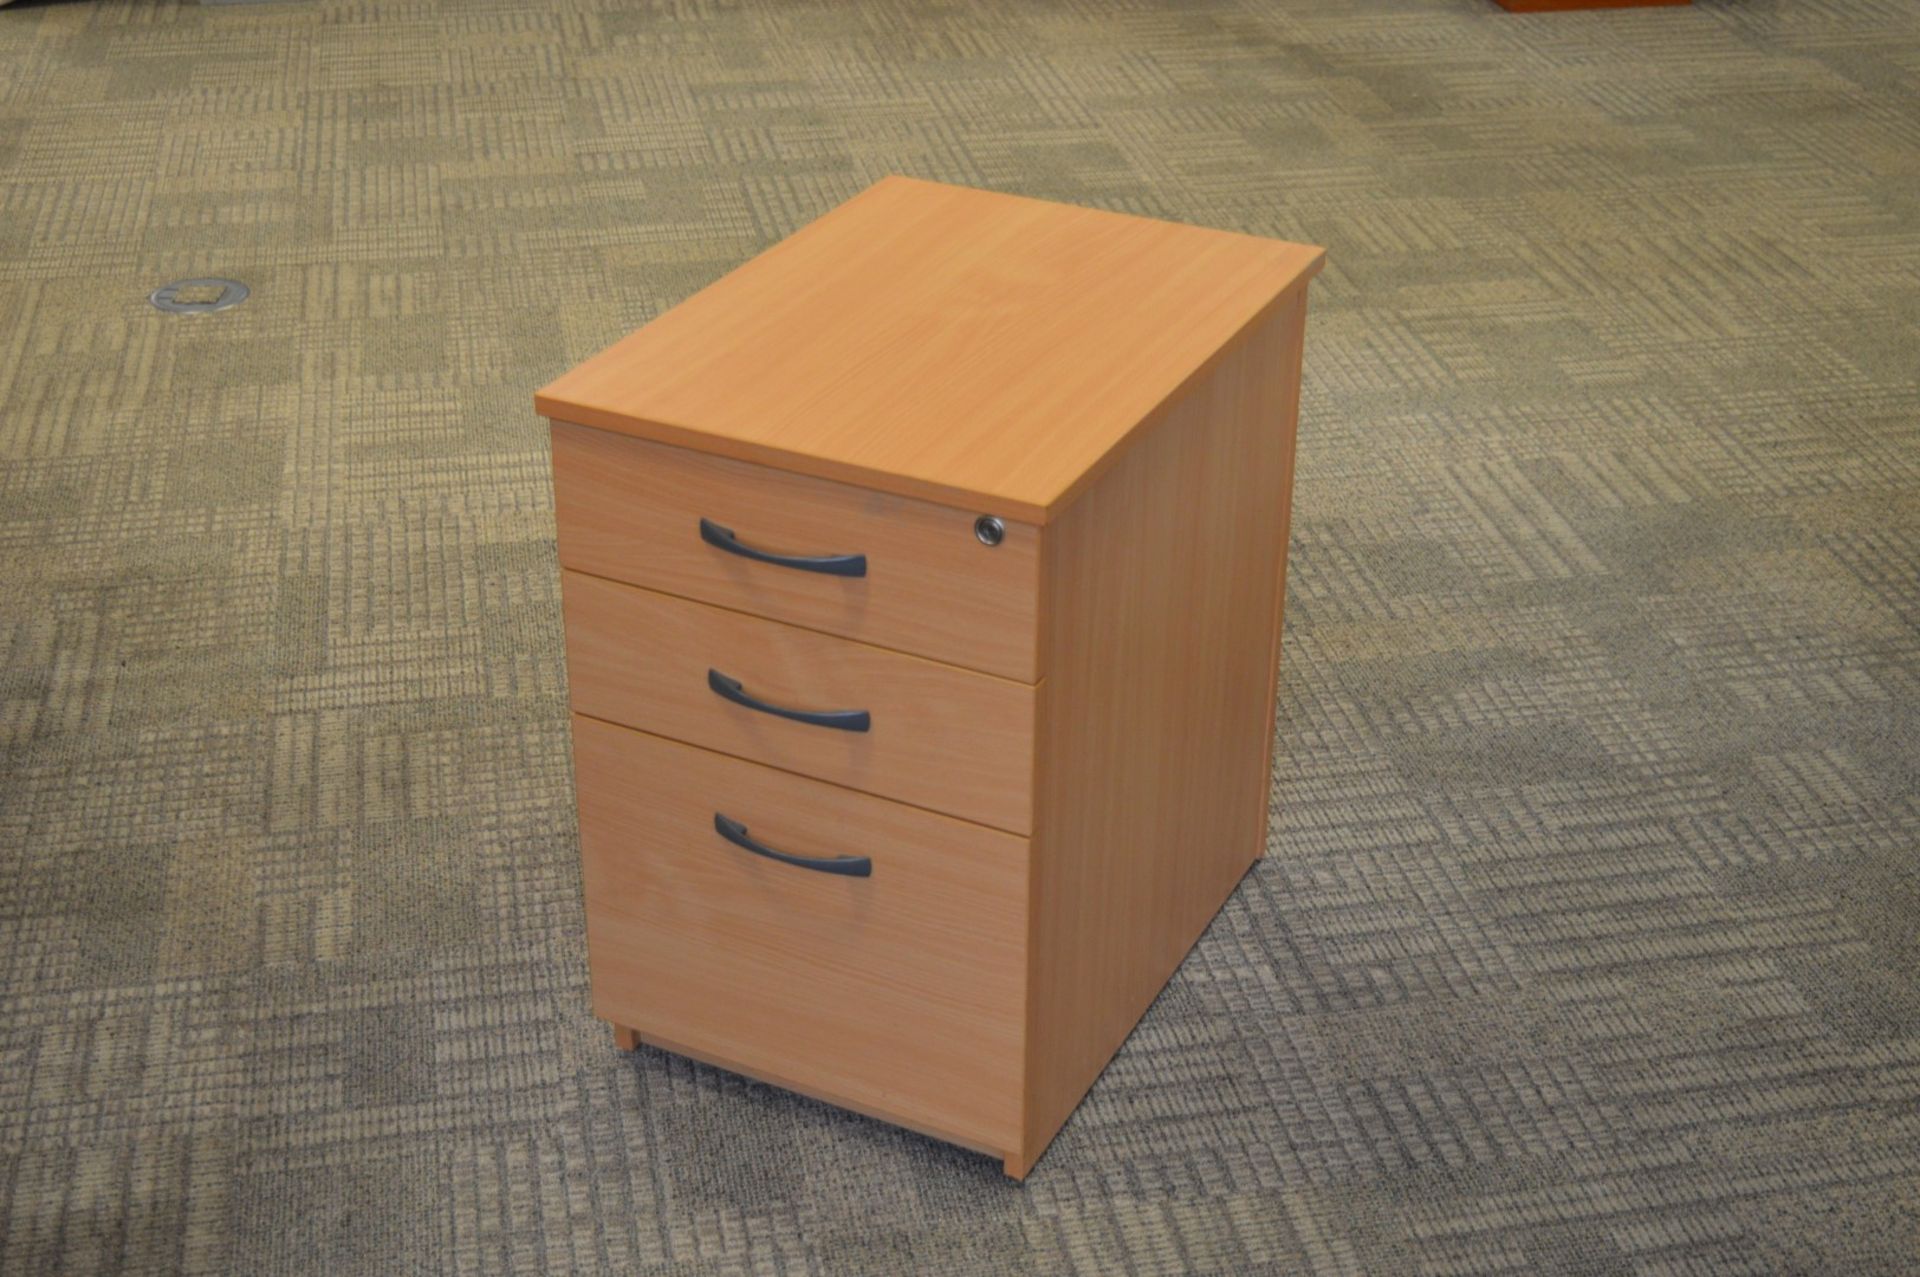 1 x Three Drawer Mobile Pedestal Drawers - With Key - Modern Beech Finish - Two Storage Drawers - Image 3 of 6